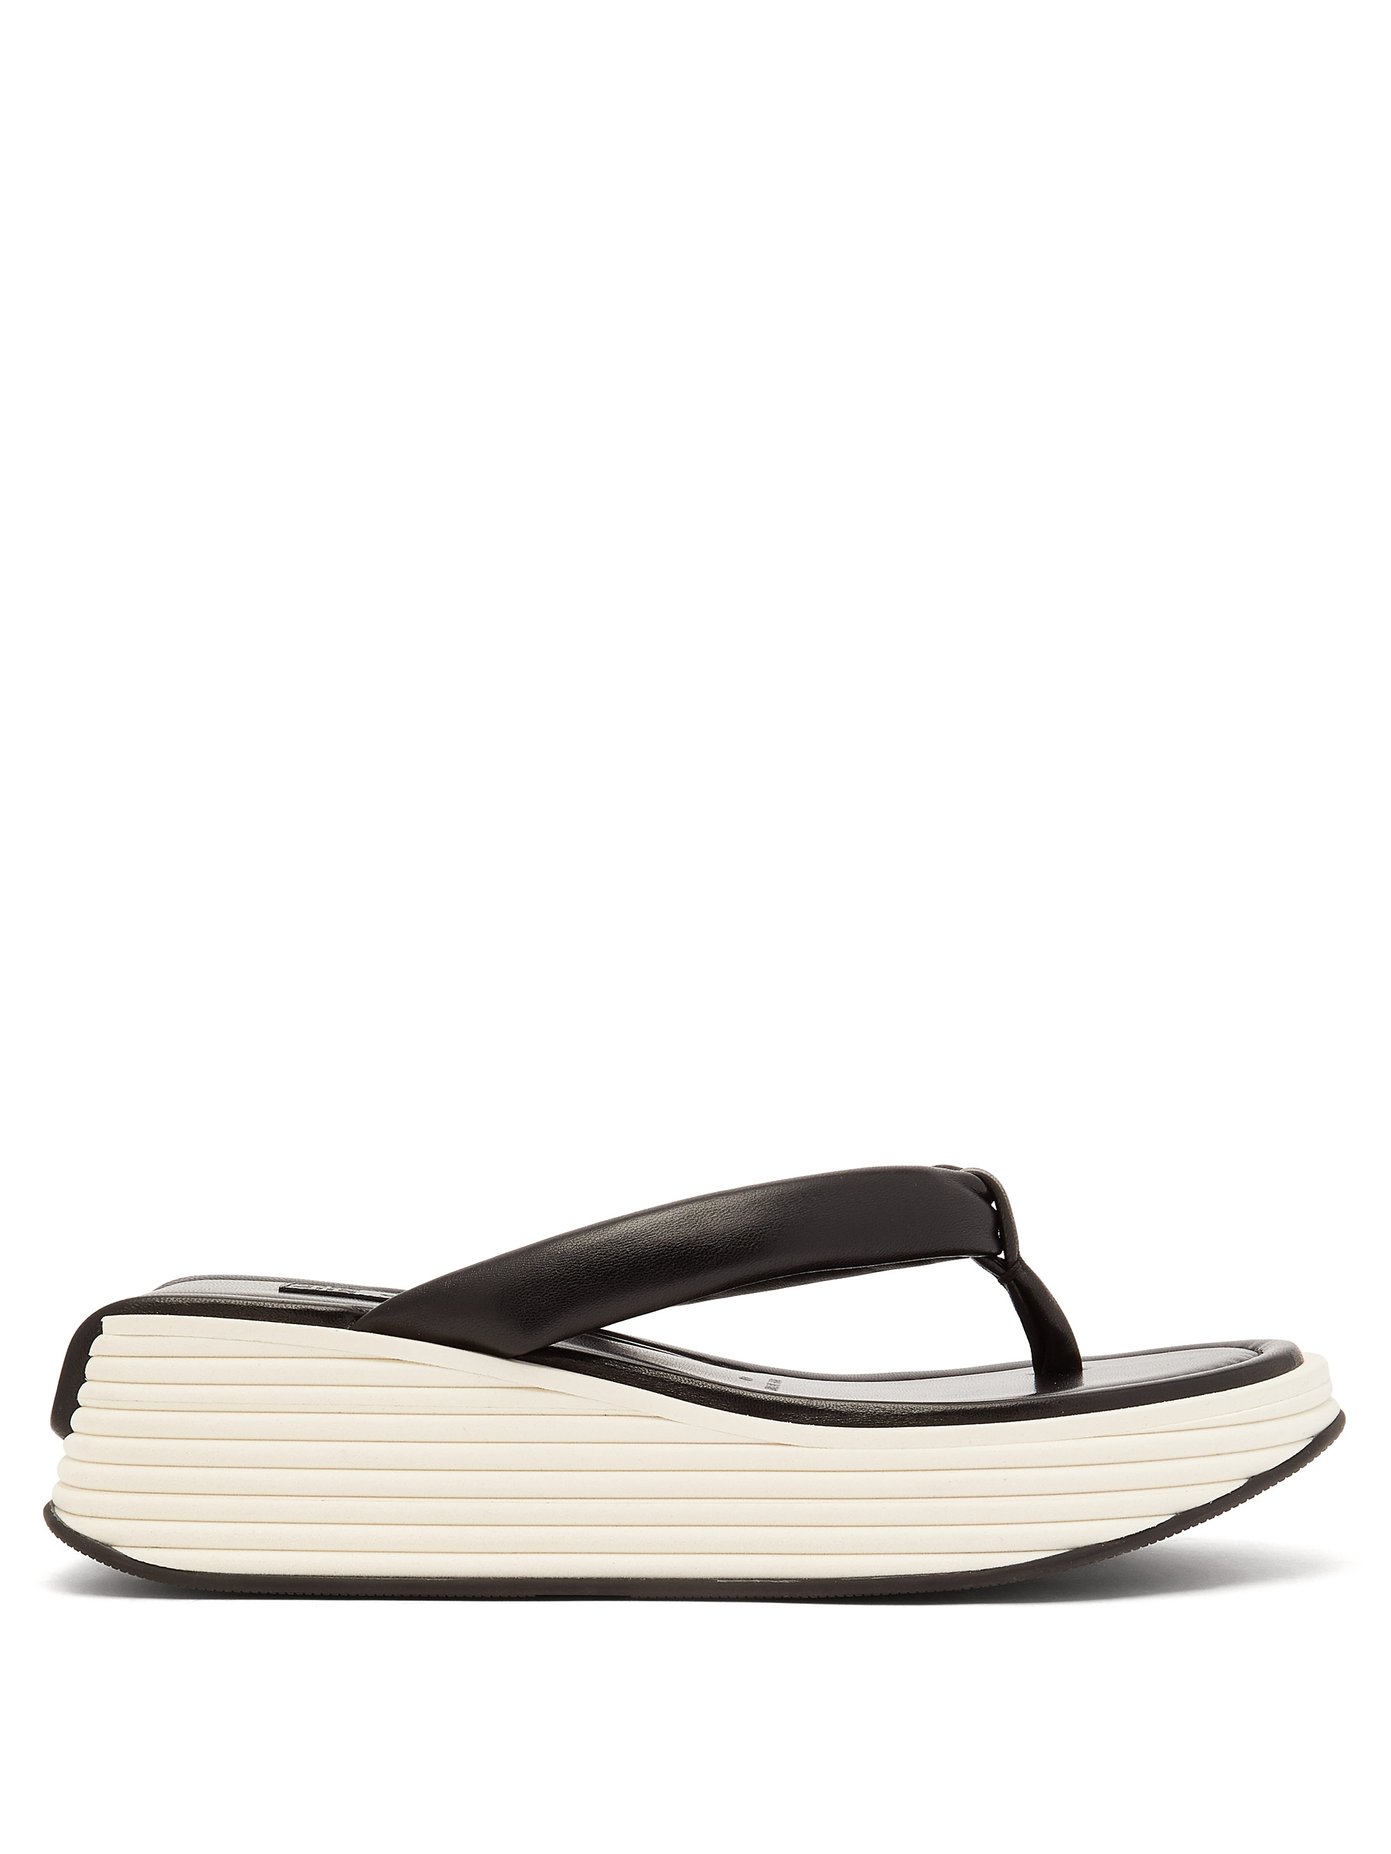 givenchy womens sandals